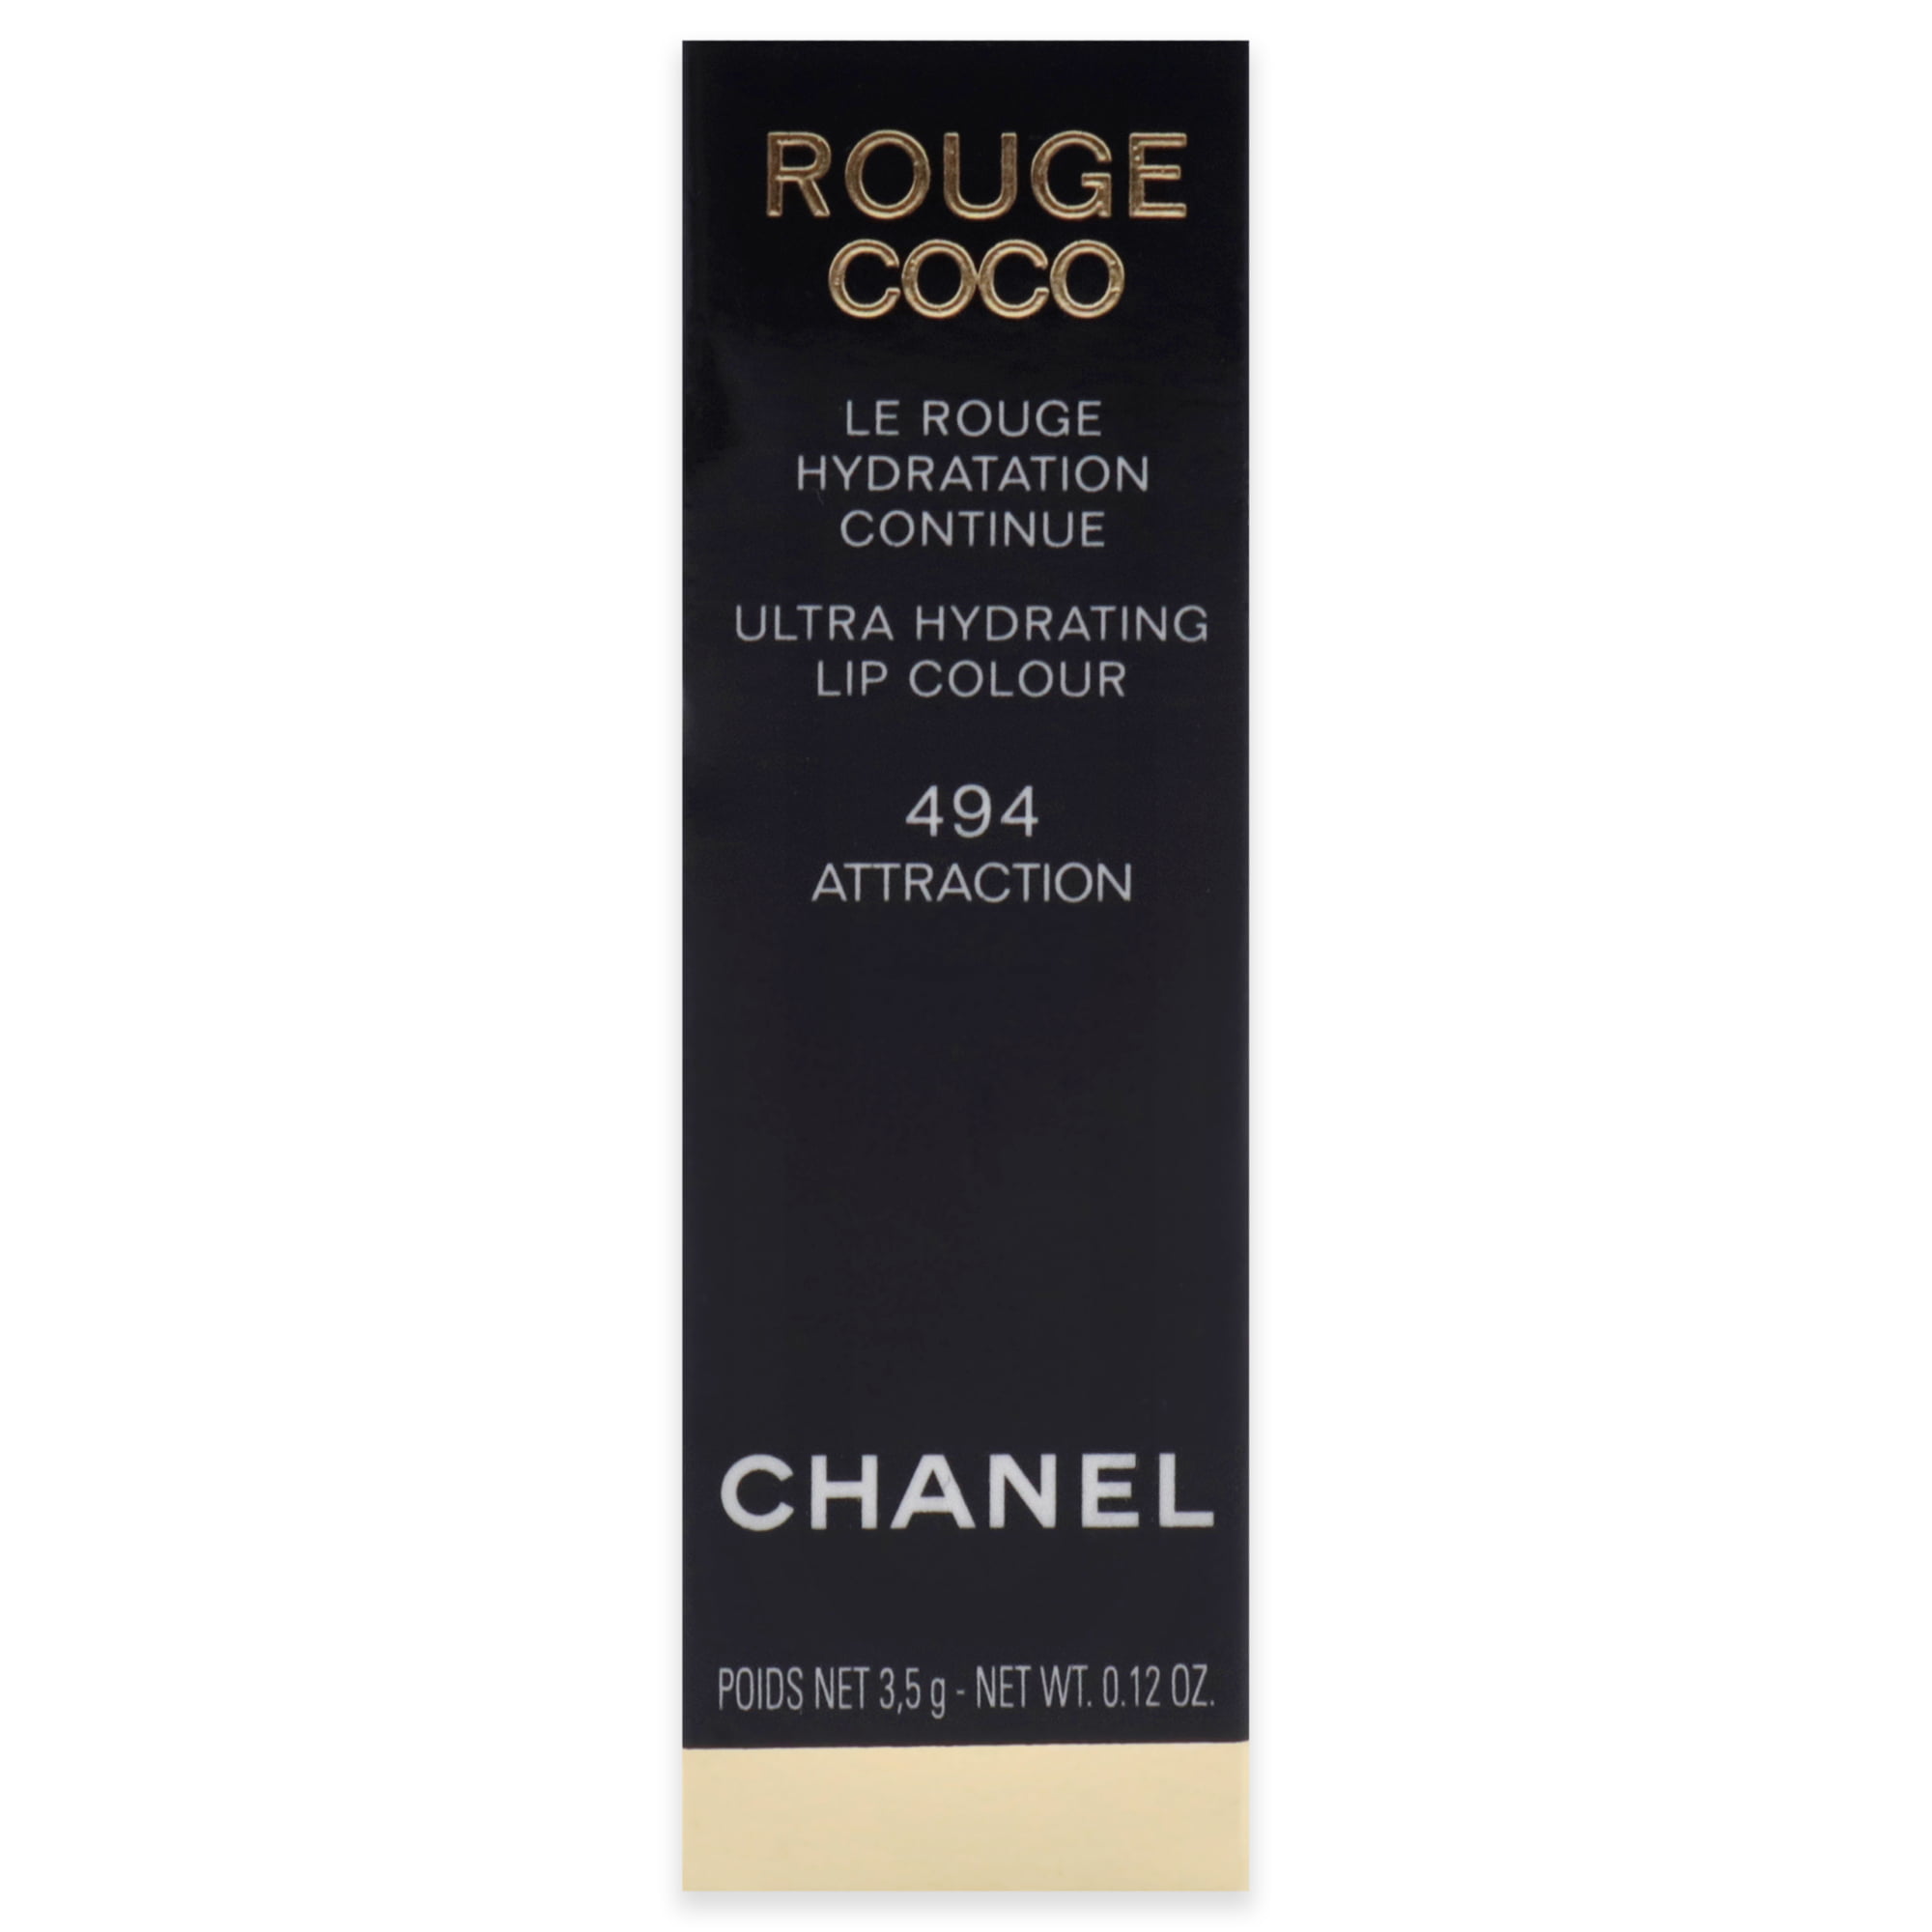  Chanel Rouge Coco Ultra Hydrating Lip Colour - 494 Attraction  Lipstick Women 0.12 oz : Beauty & Personal Care